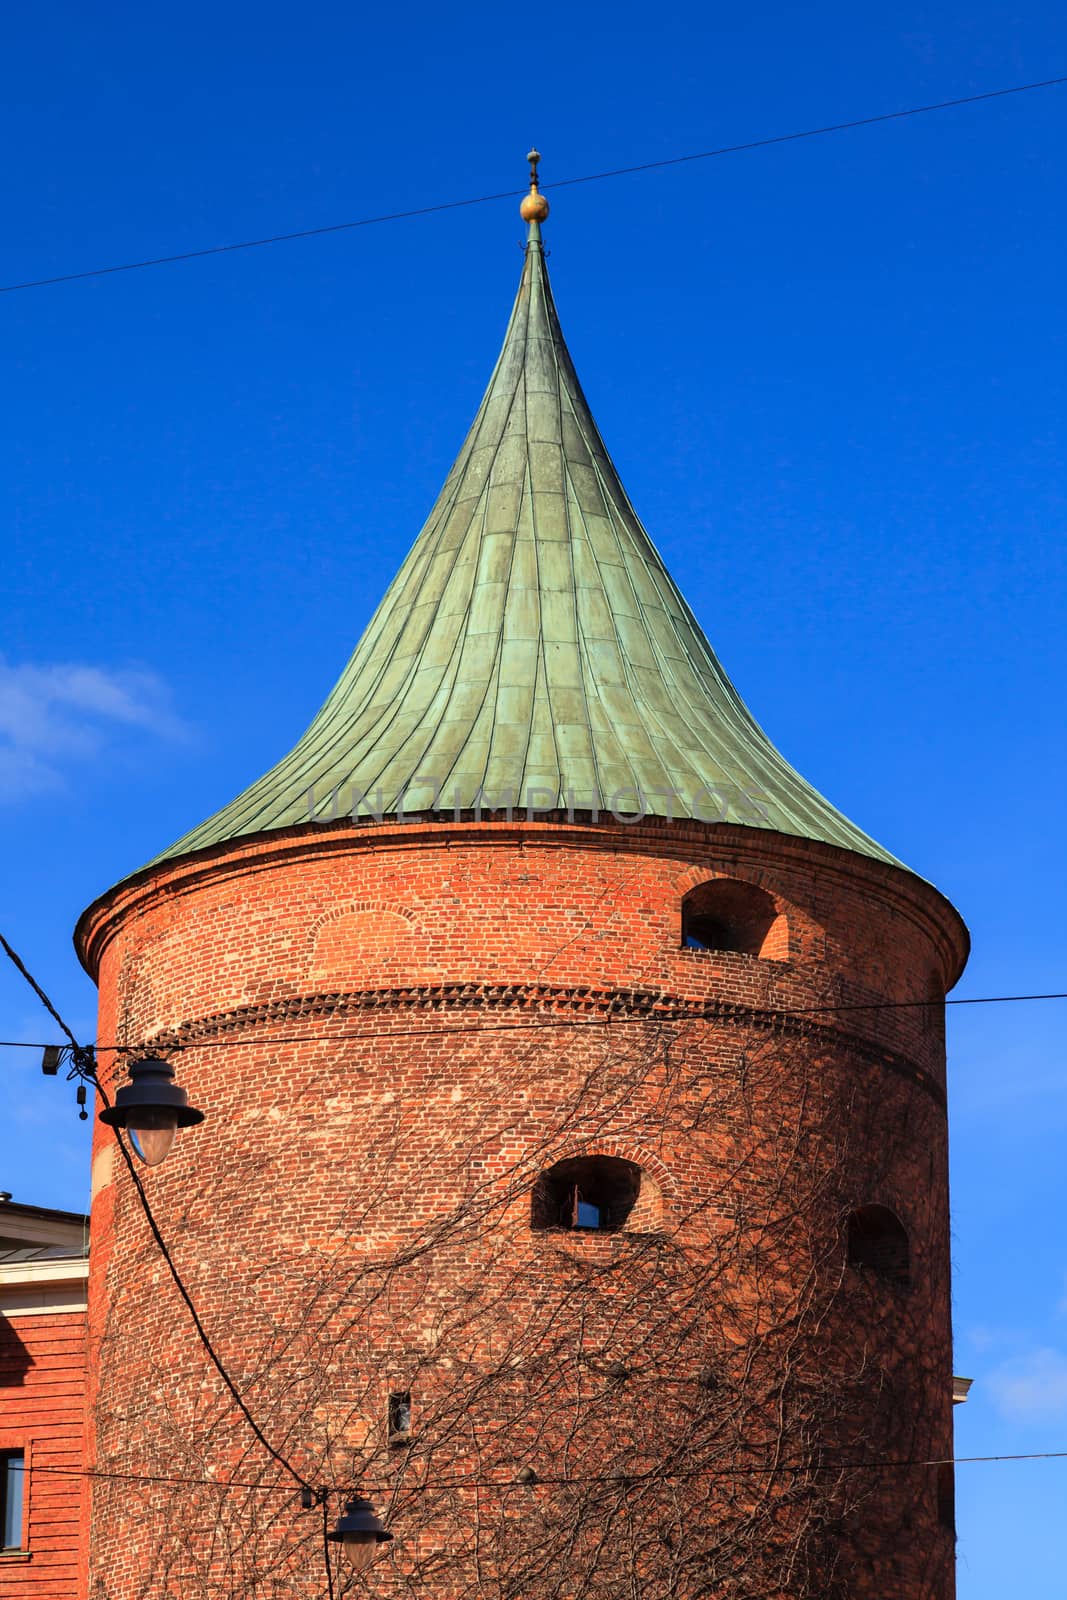 The Powder Tower in Riga, capital of Latvia, dates back to the 14th century and was originally part of the defensive fortress surrounding the old town.